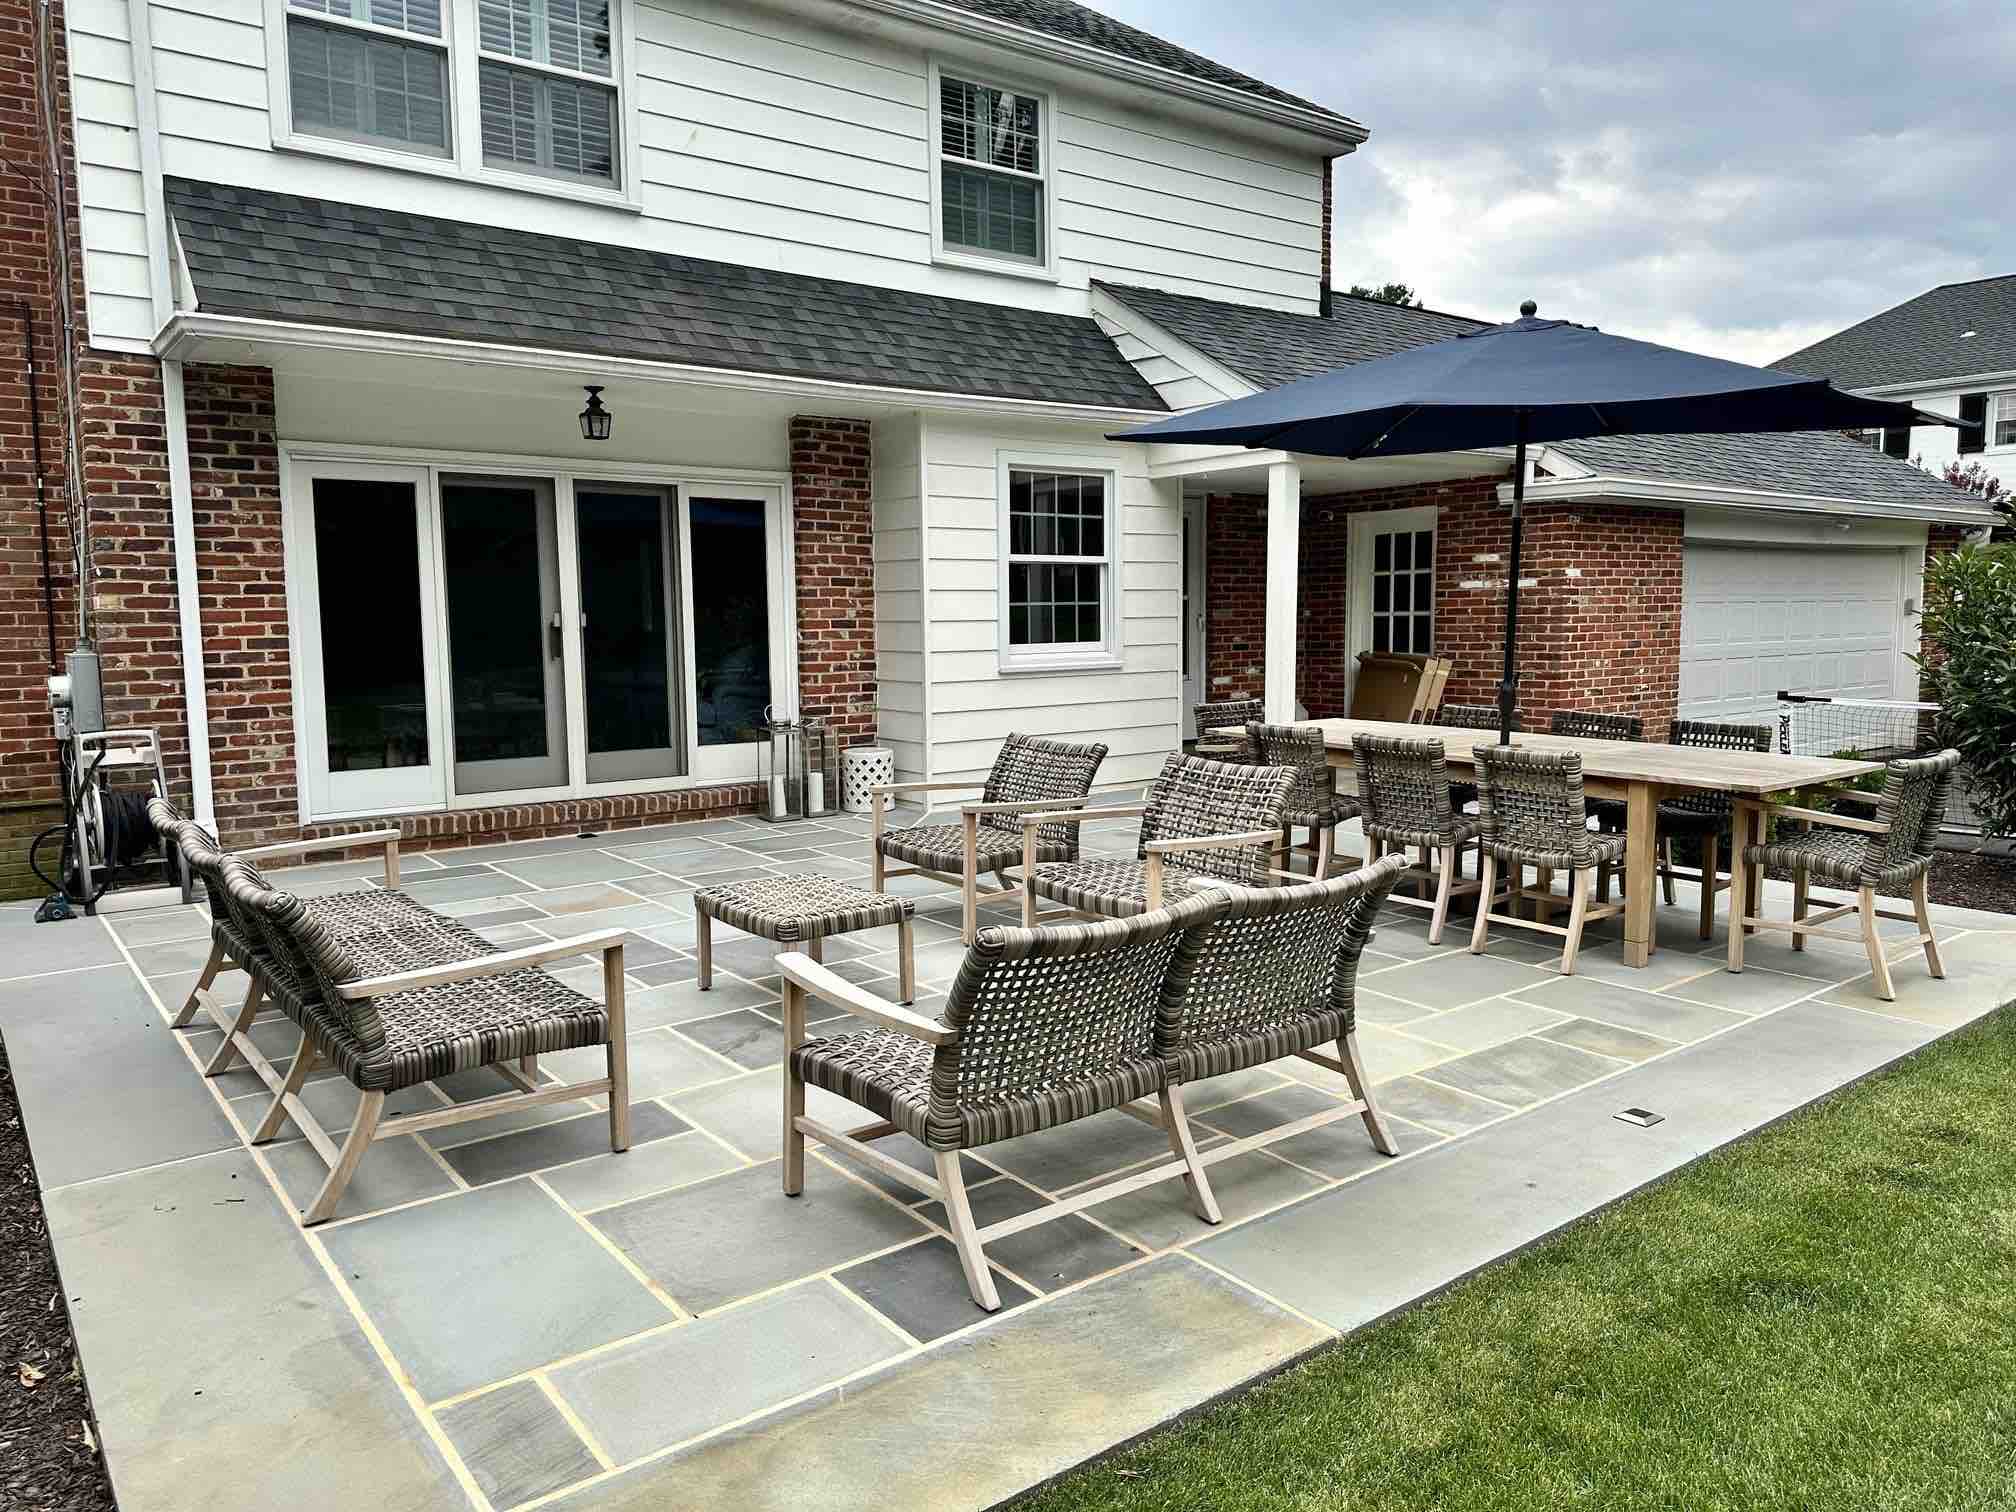 Patio With Seating in Back Yard by First Class Lawn Care
